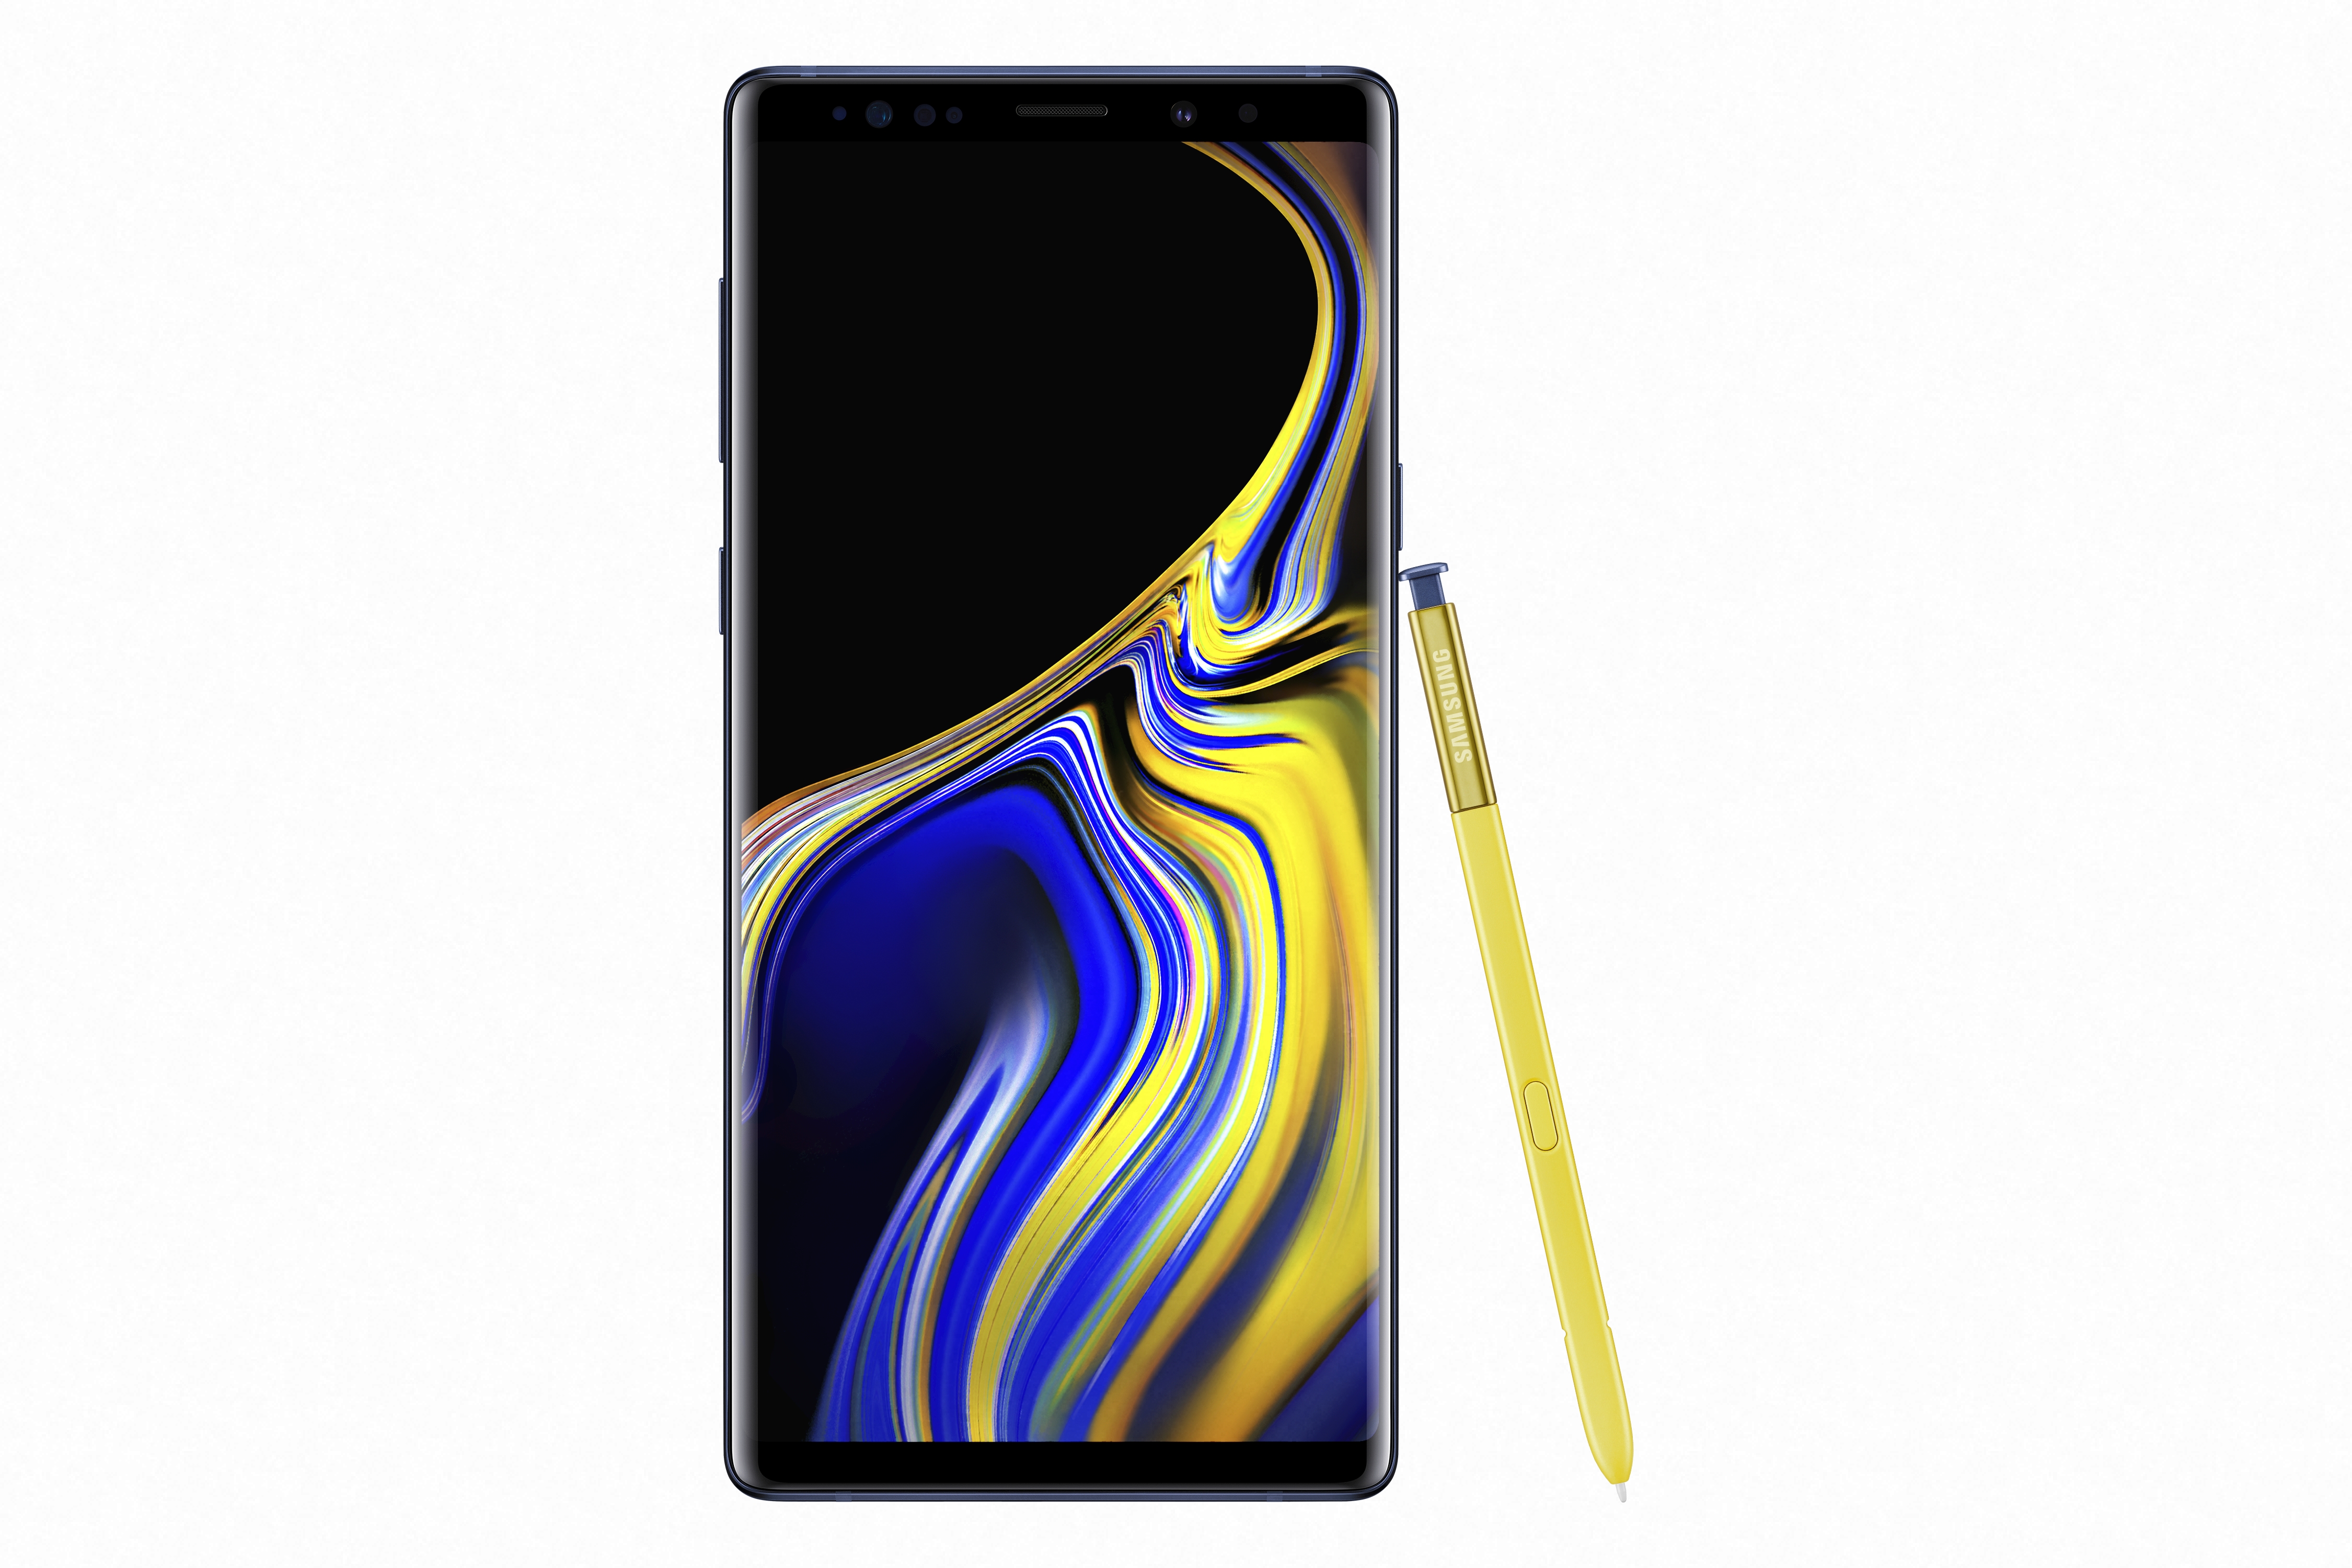 Samsung Unveils the Galaxy Note 9 with 8GB RAM, LongLasting 4000 mAh